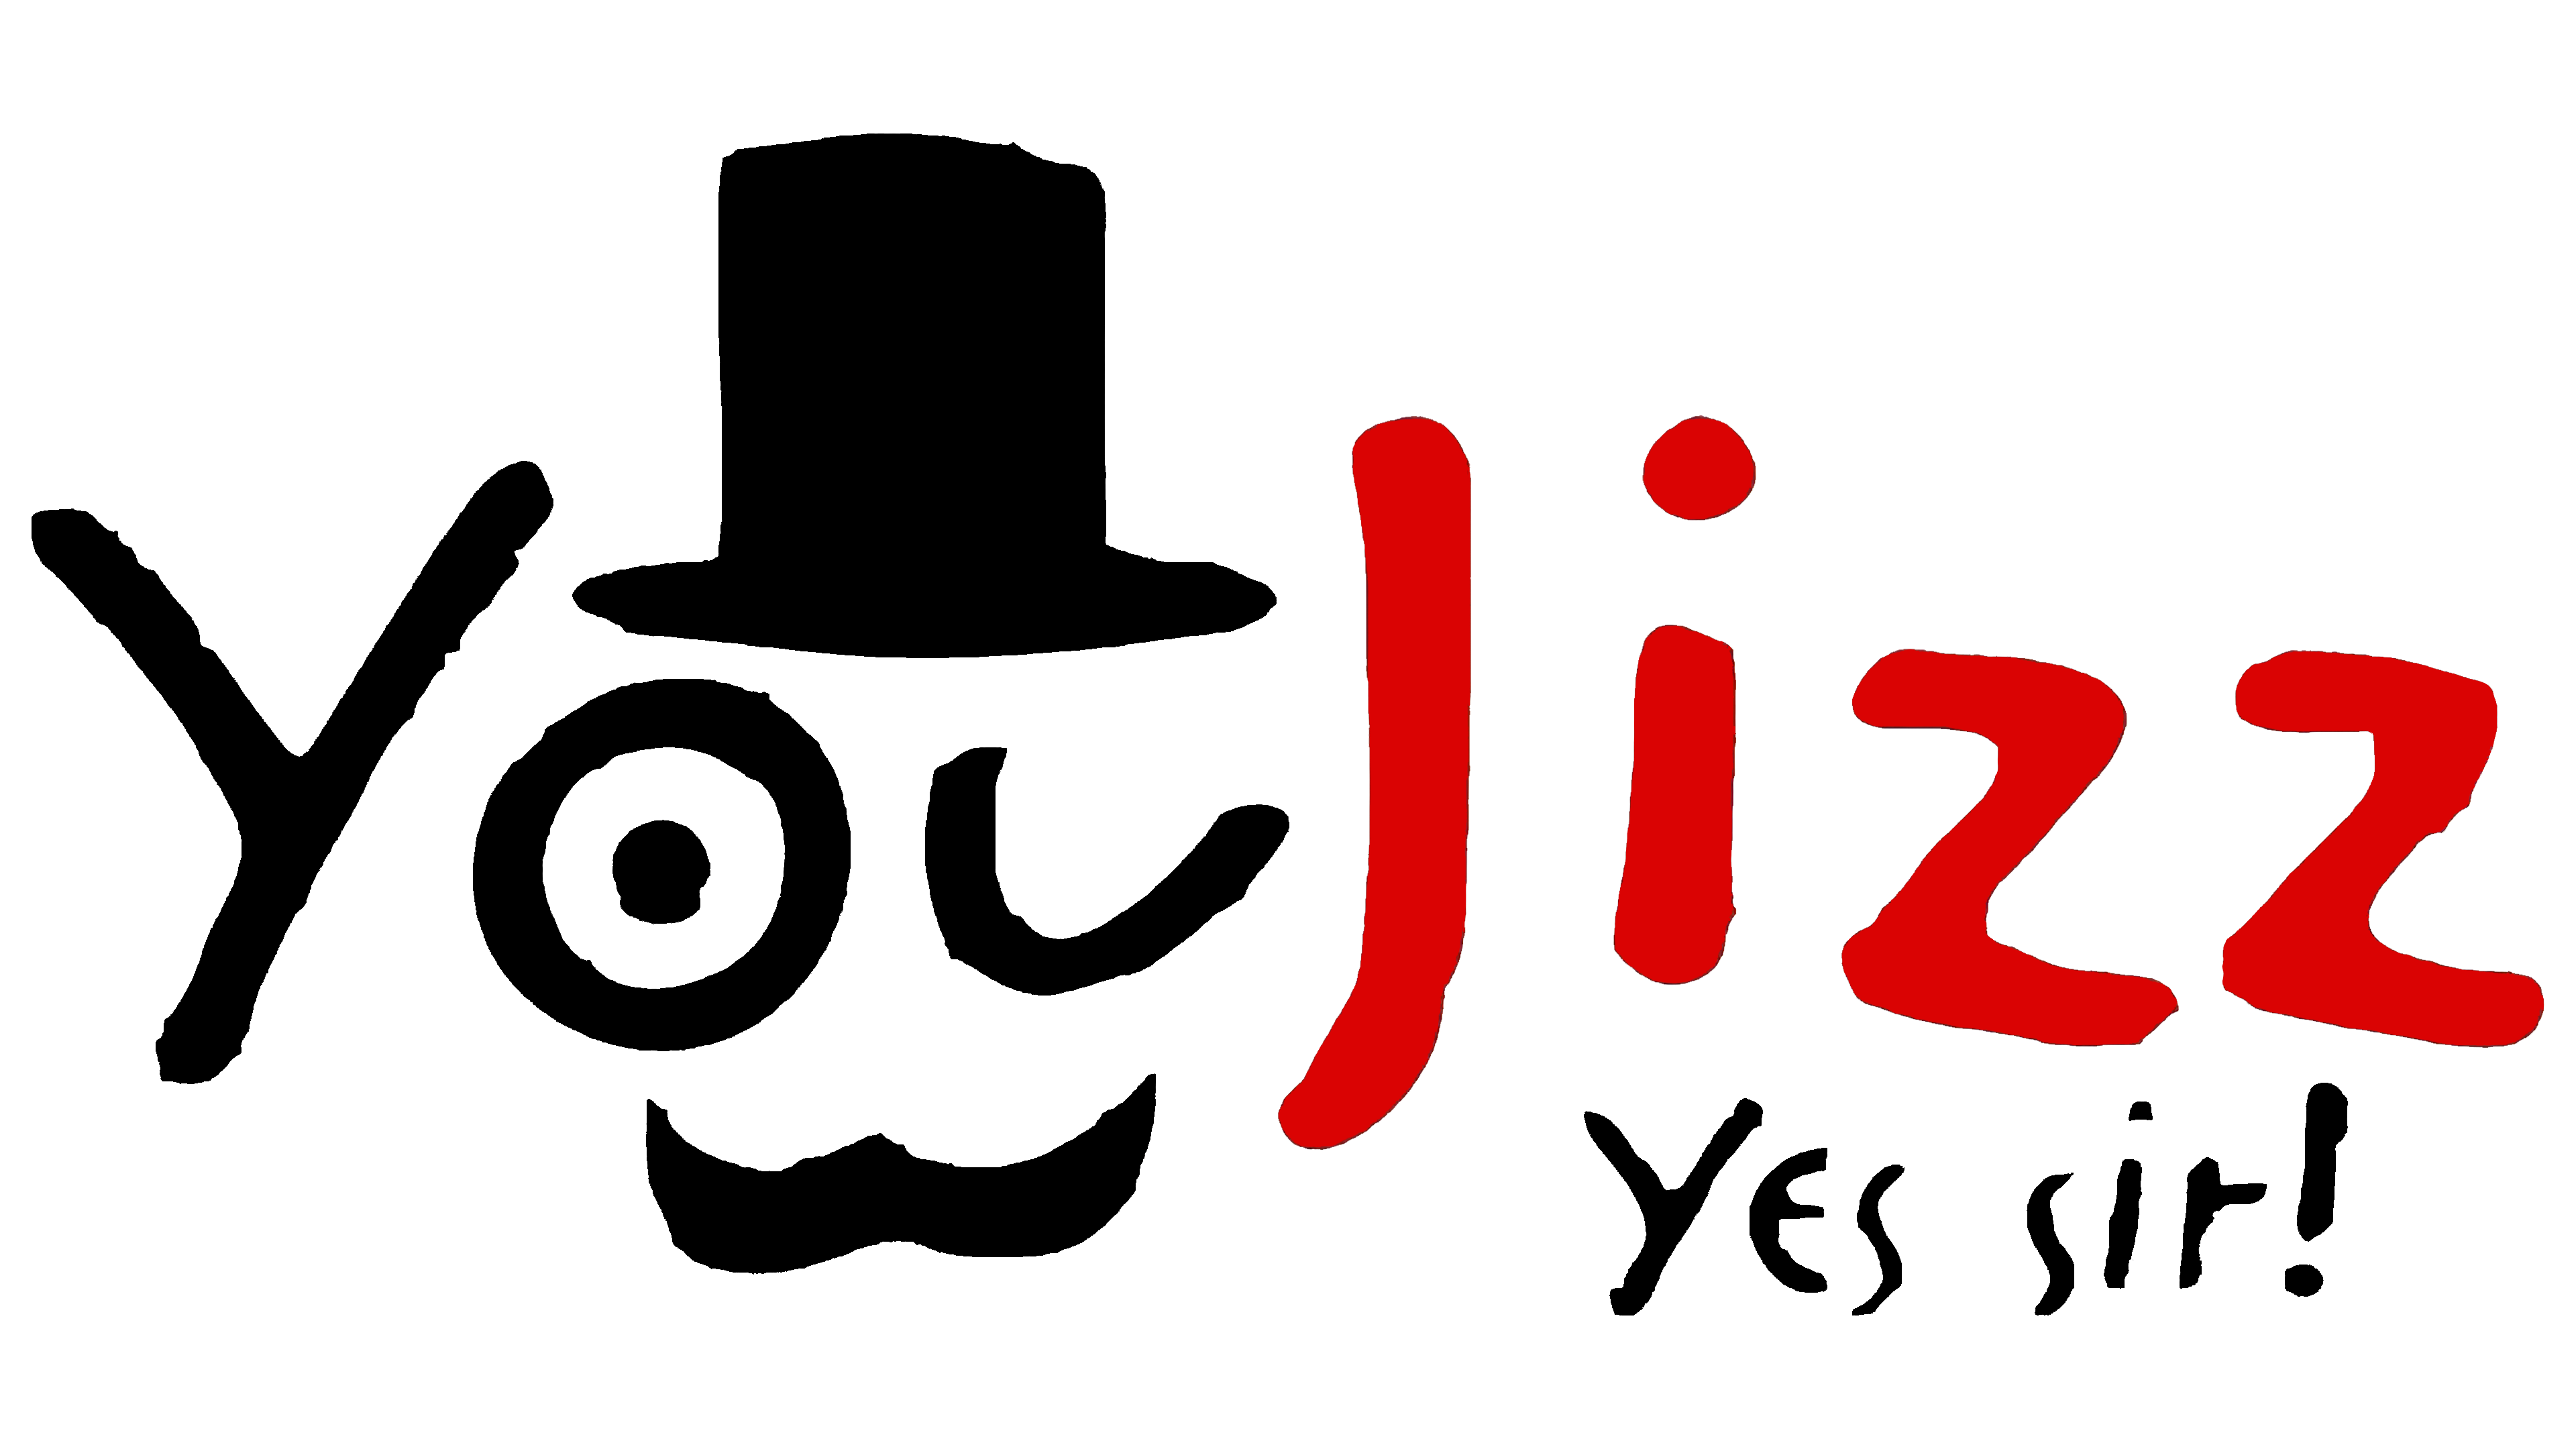 Youjizz Logo Symbol Meaning History Png Brand